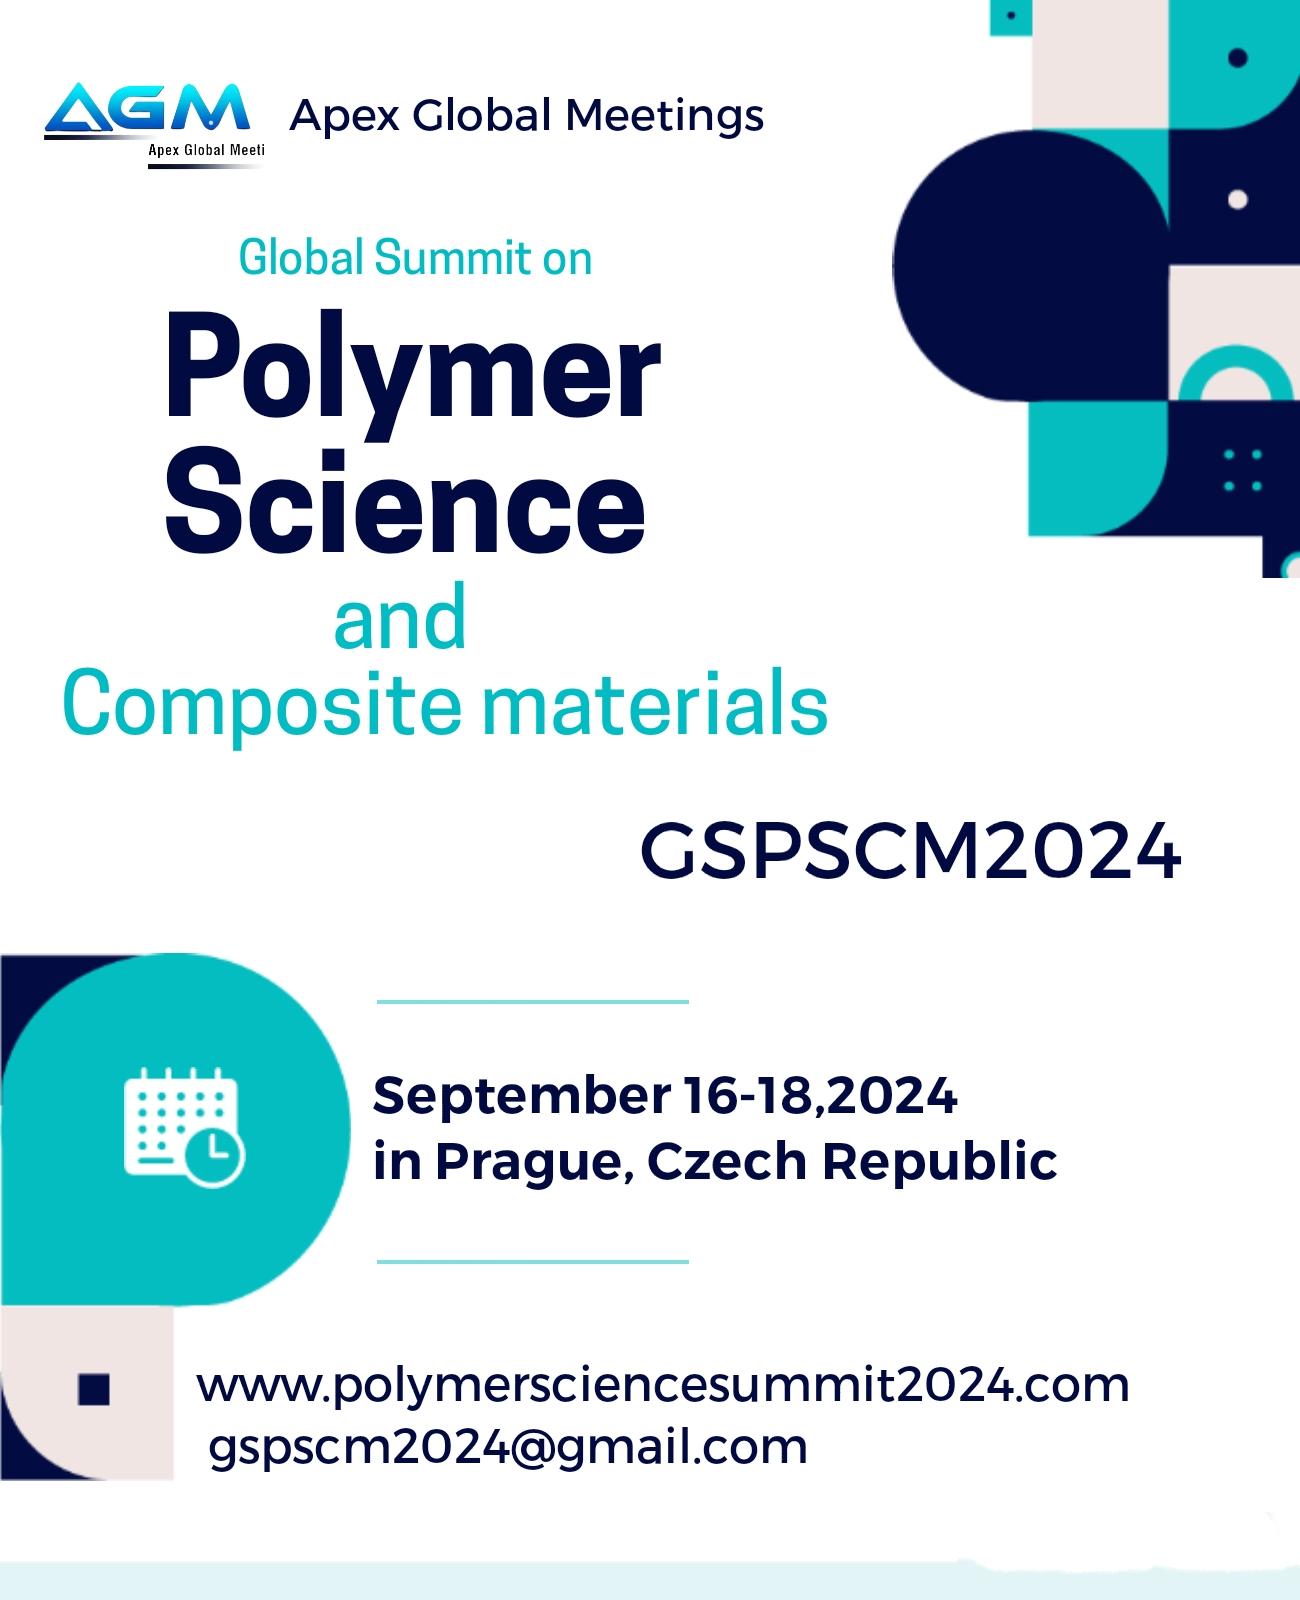 Global Summit on Polymer Science and Composite Materials (GSPSCM2024)